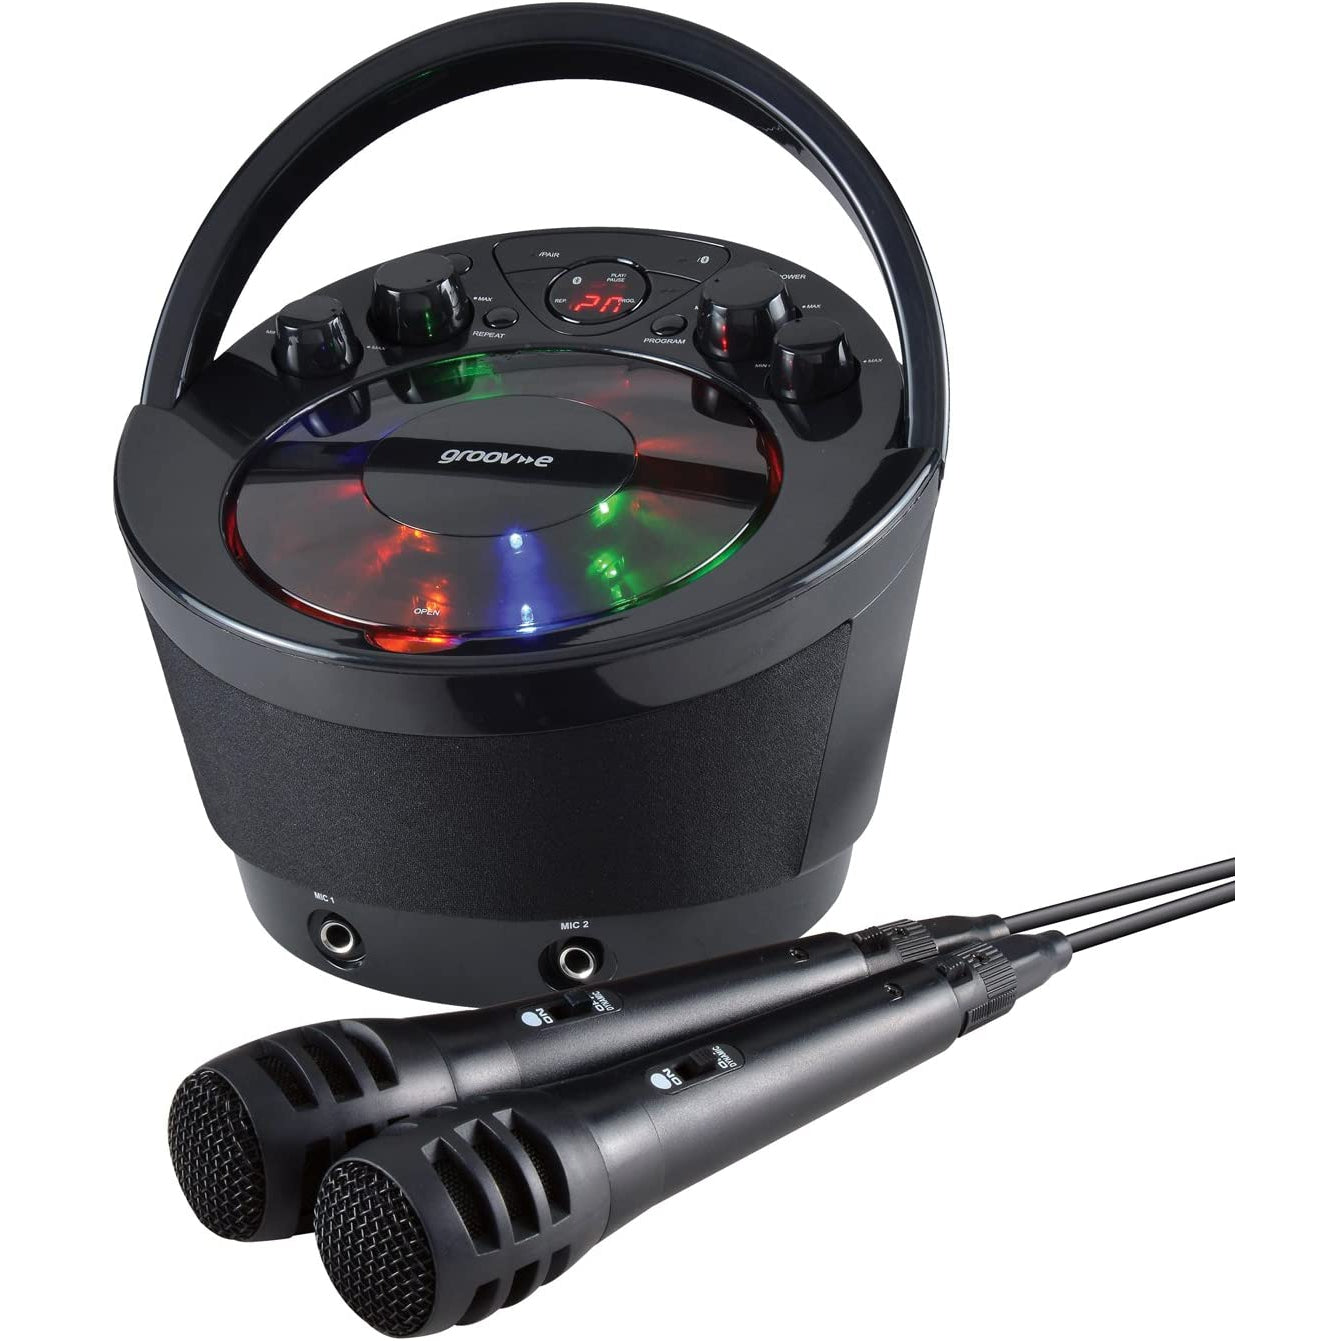 Groov-e GV-PS923 Portable Party Karaoke Boombox Machine with CD Player